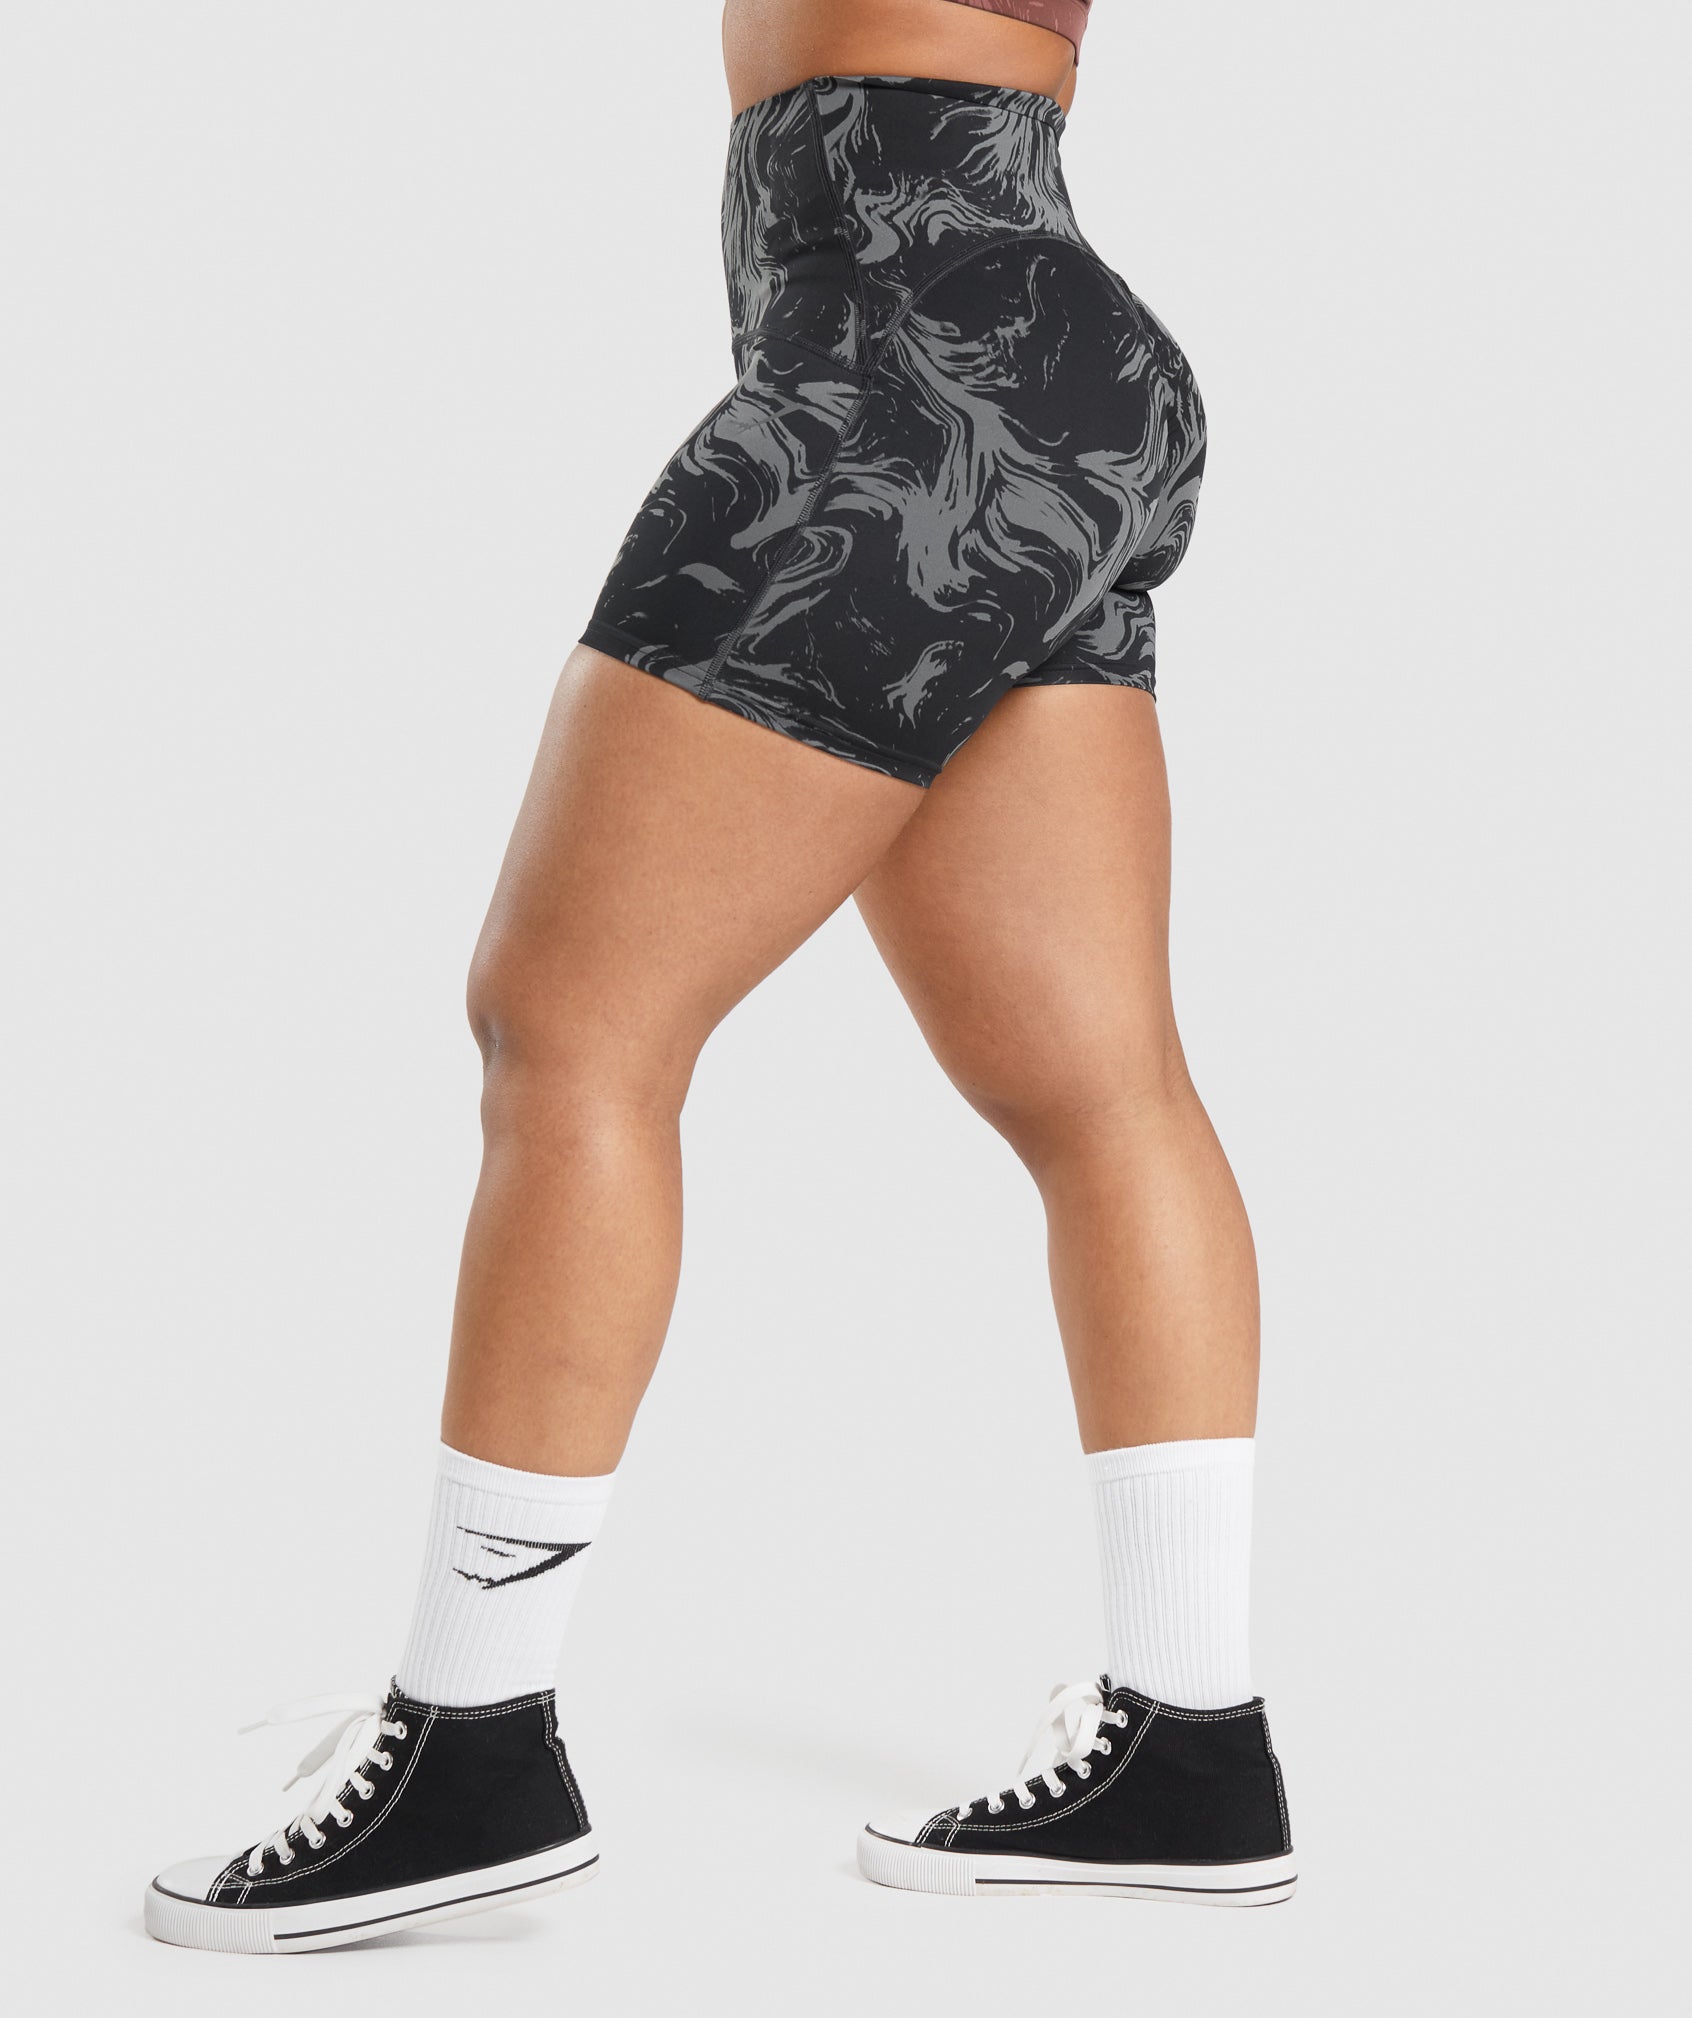 GS Power High Rise Shorts in Black Print - view 3